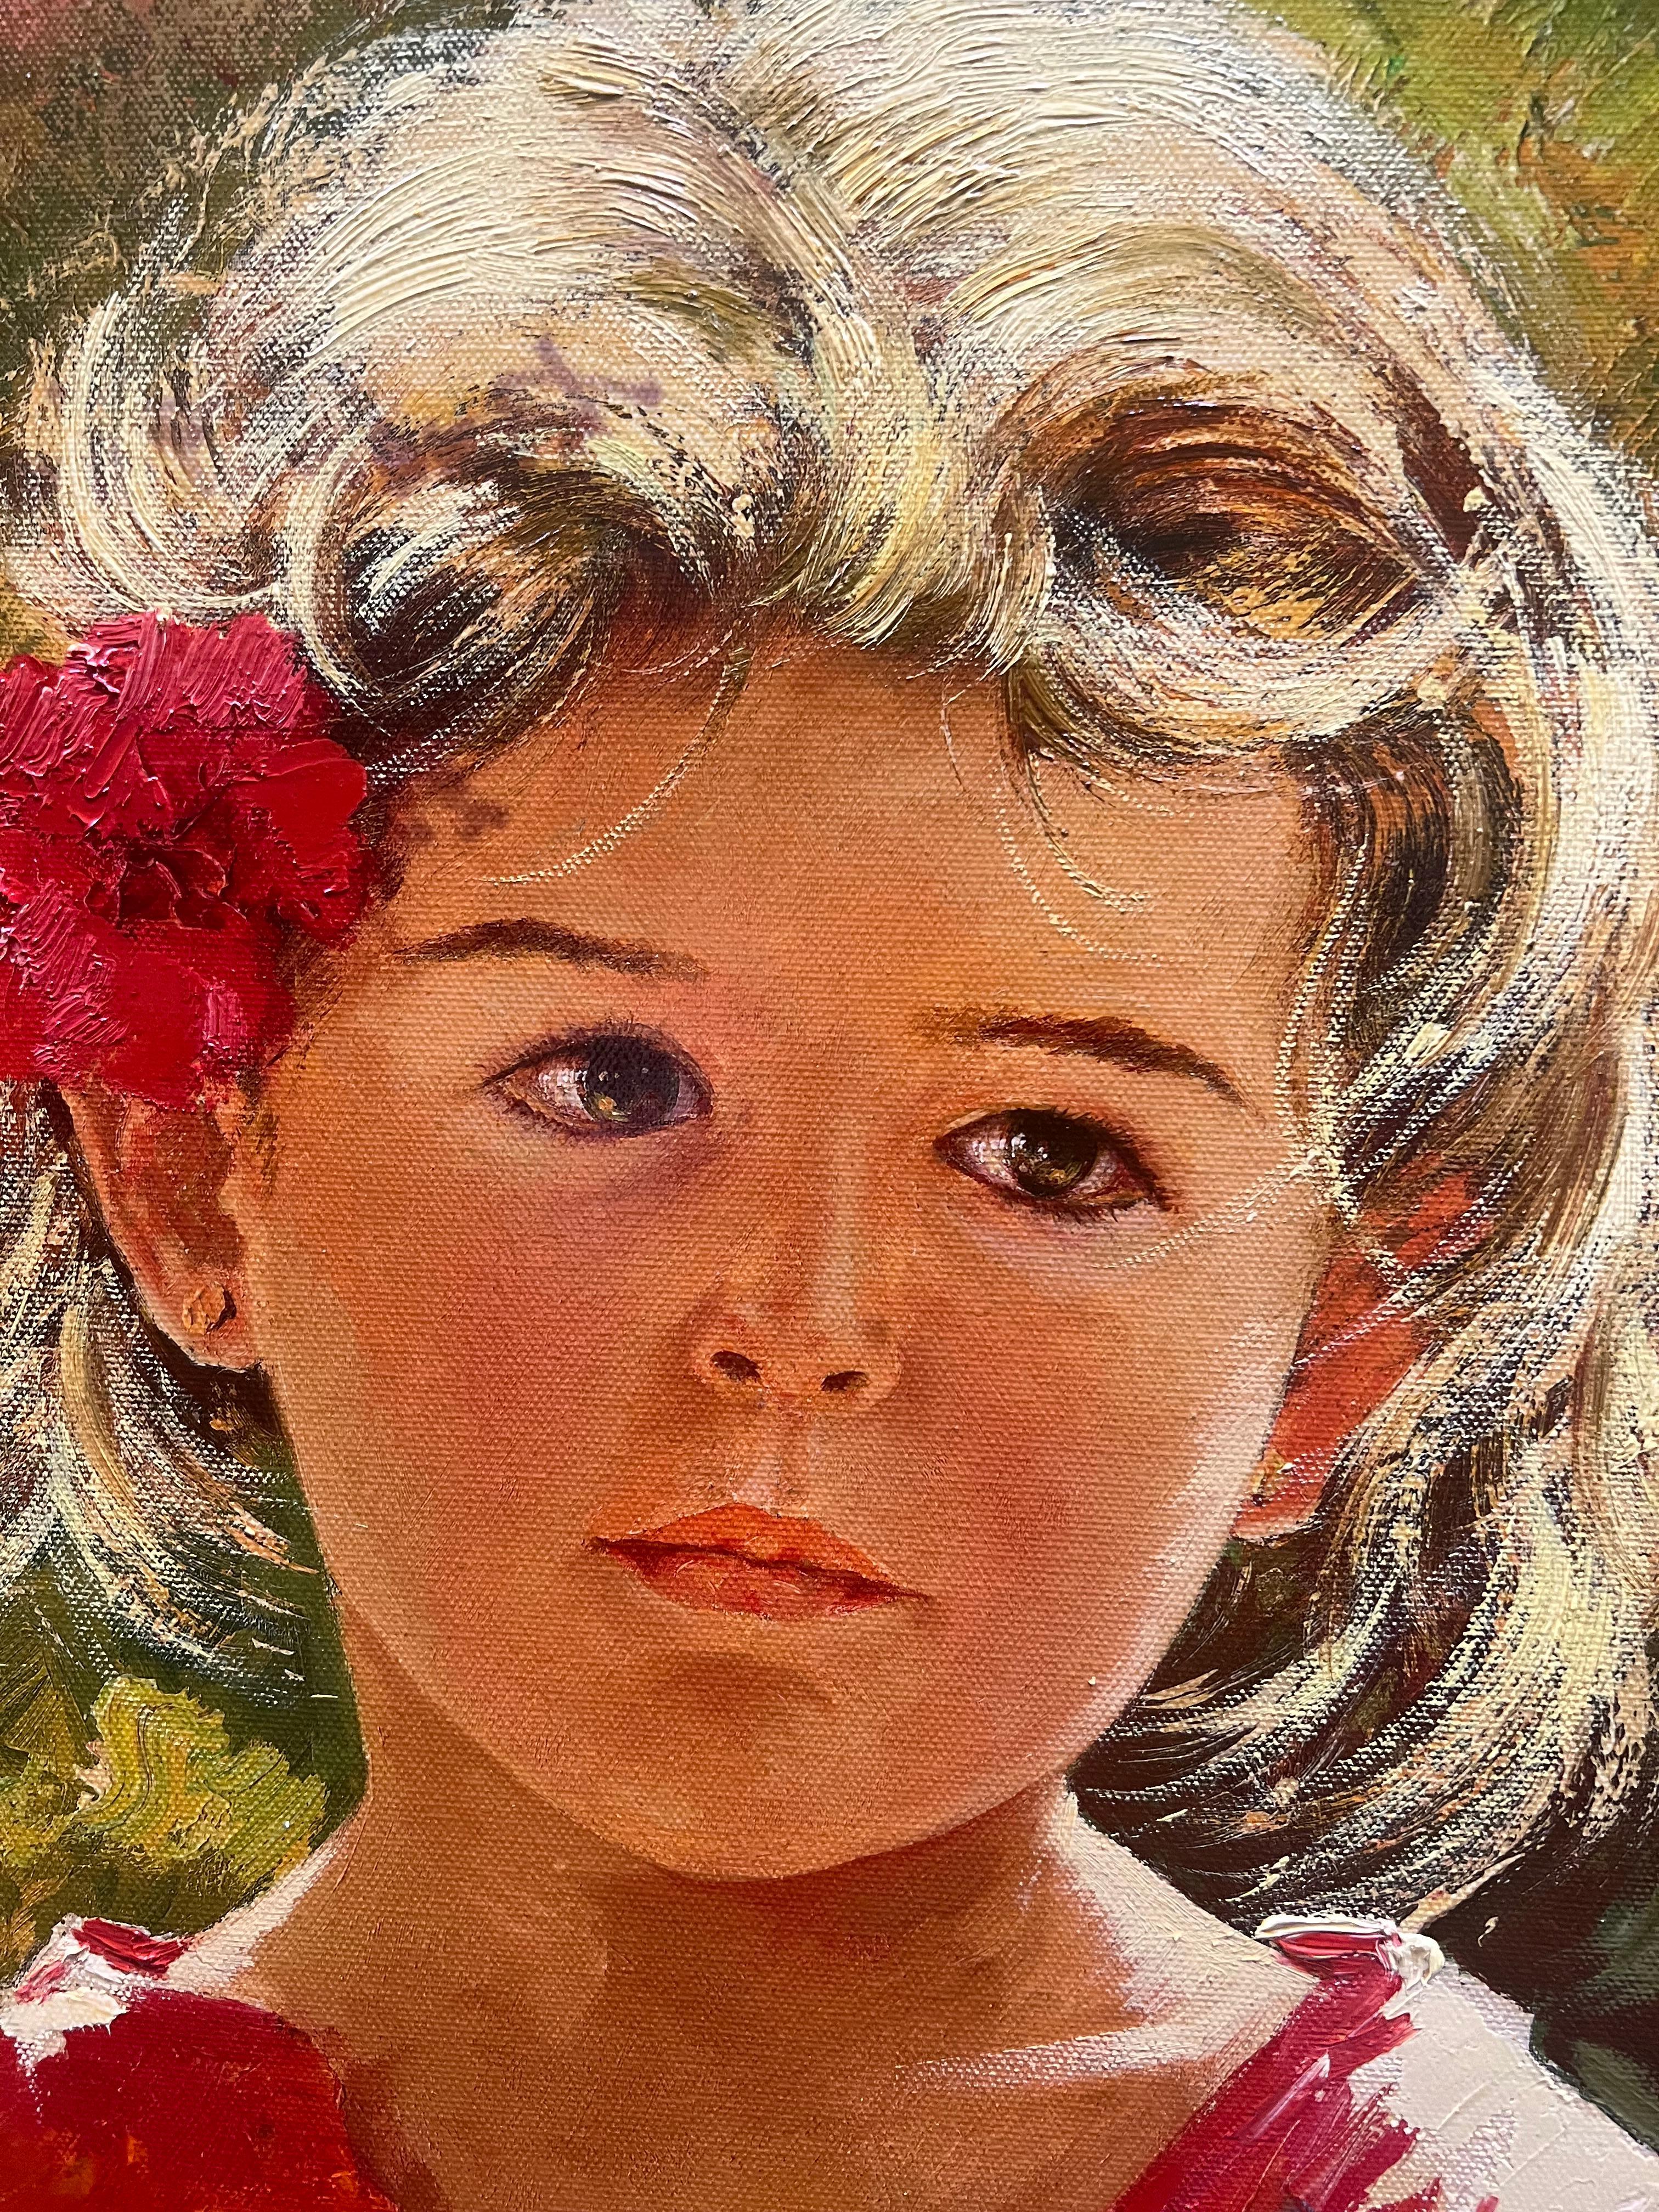 Sweetness - Painting by Roman Frances